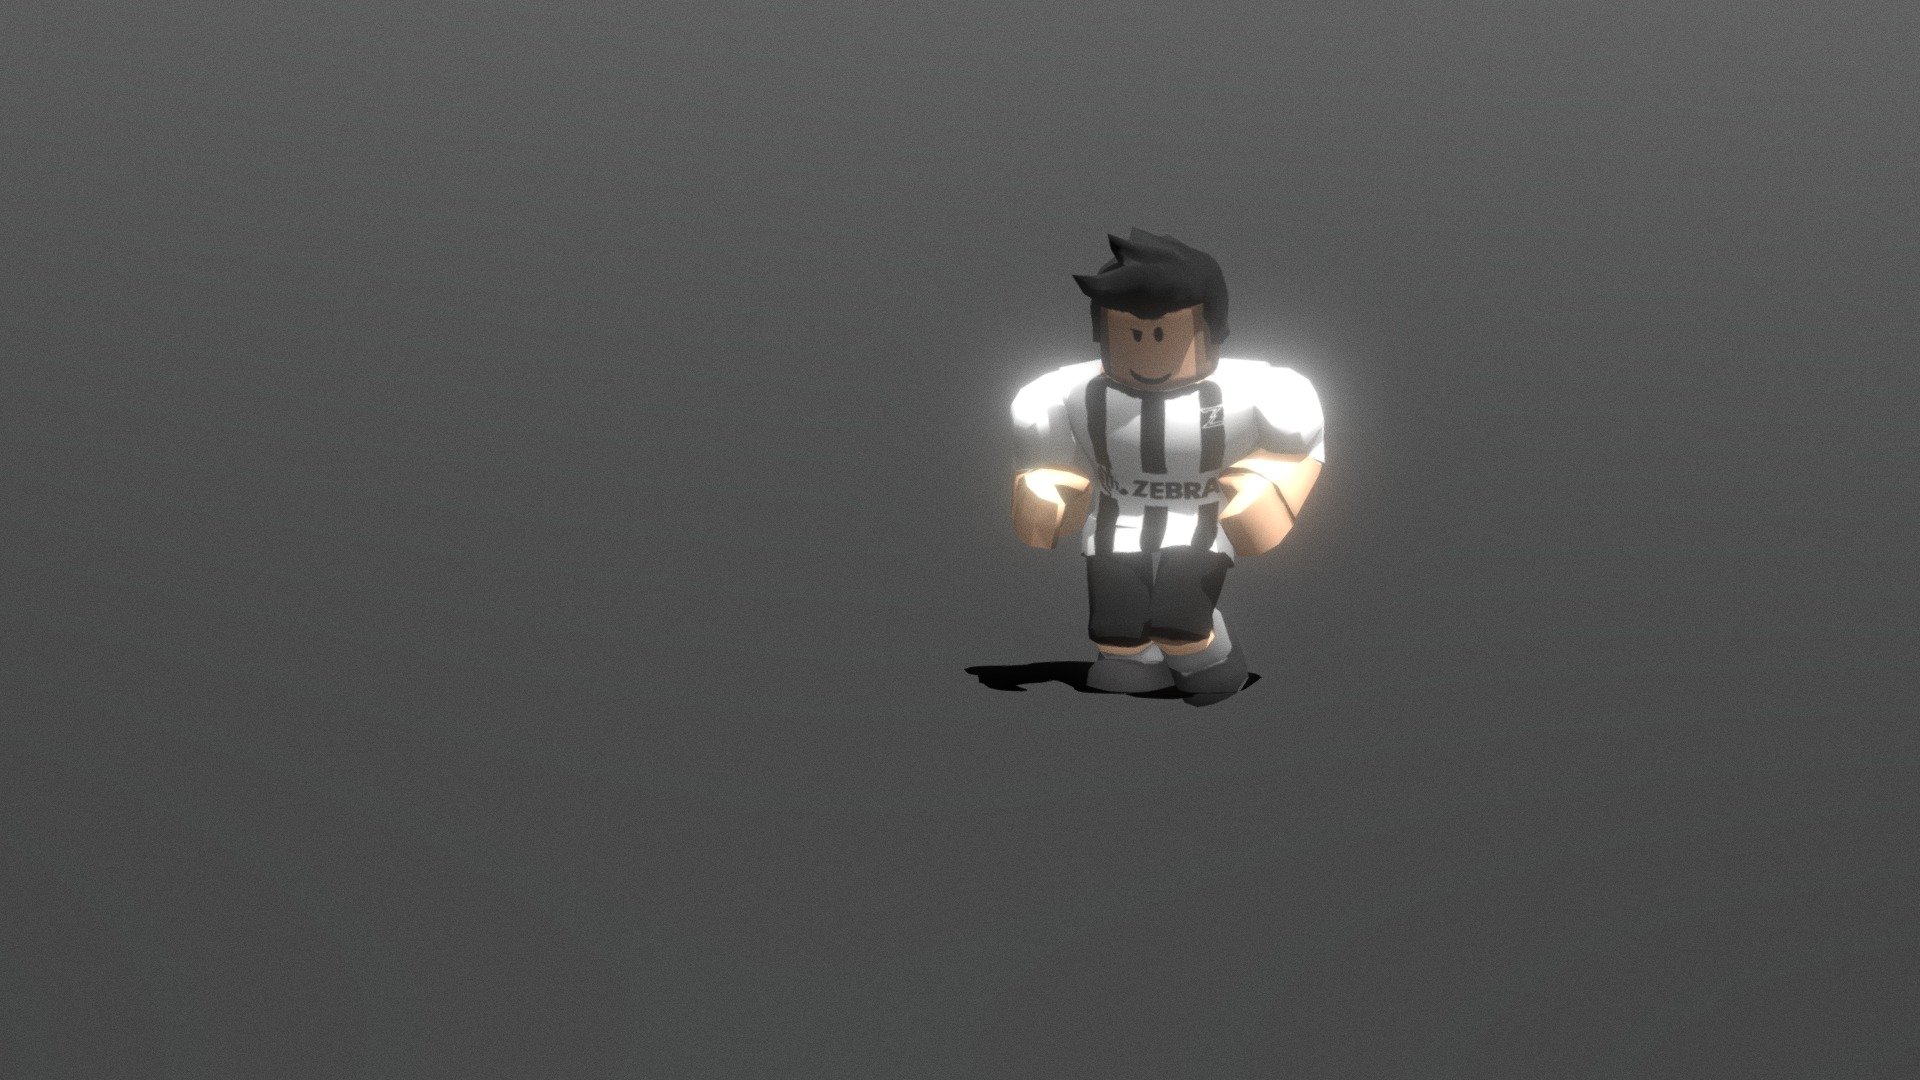 Roblox Soccer player(ANIMATION)